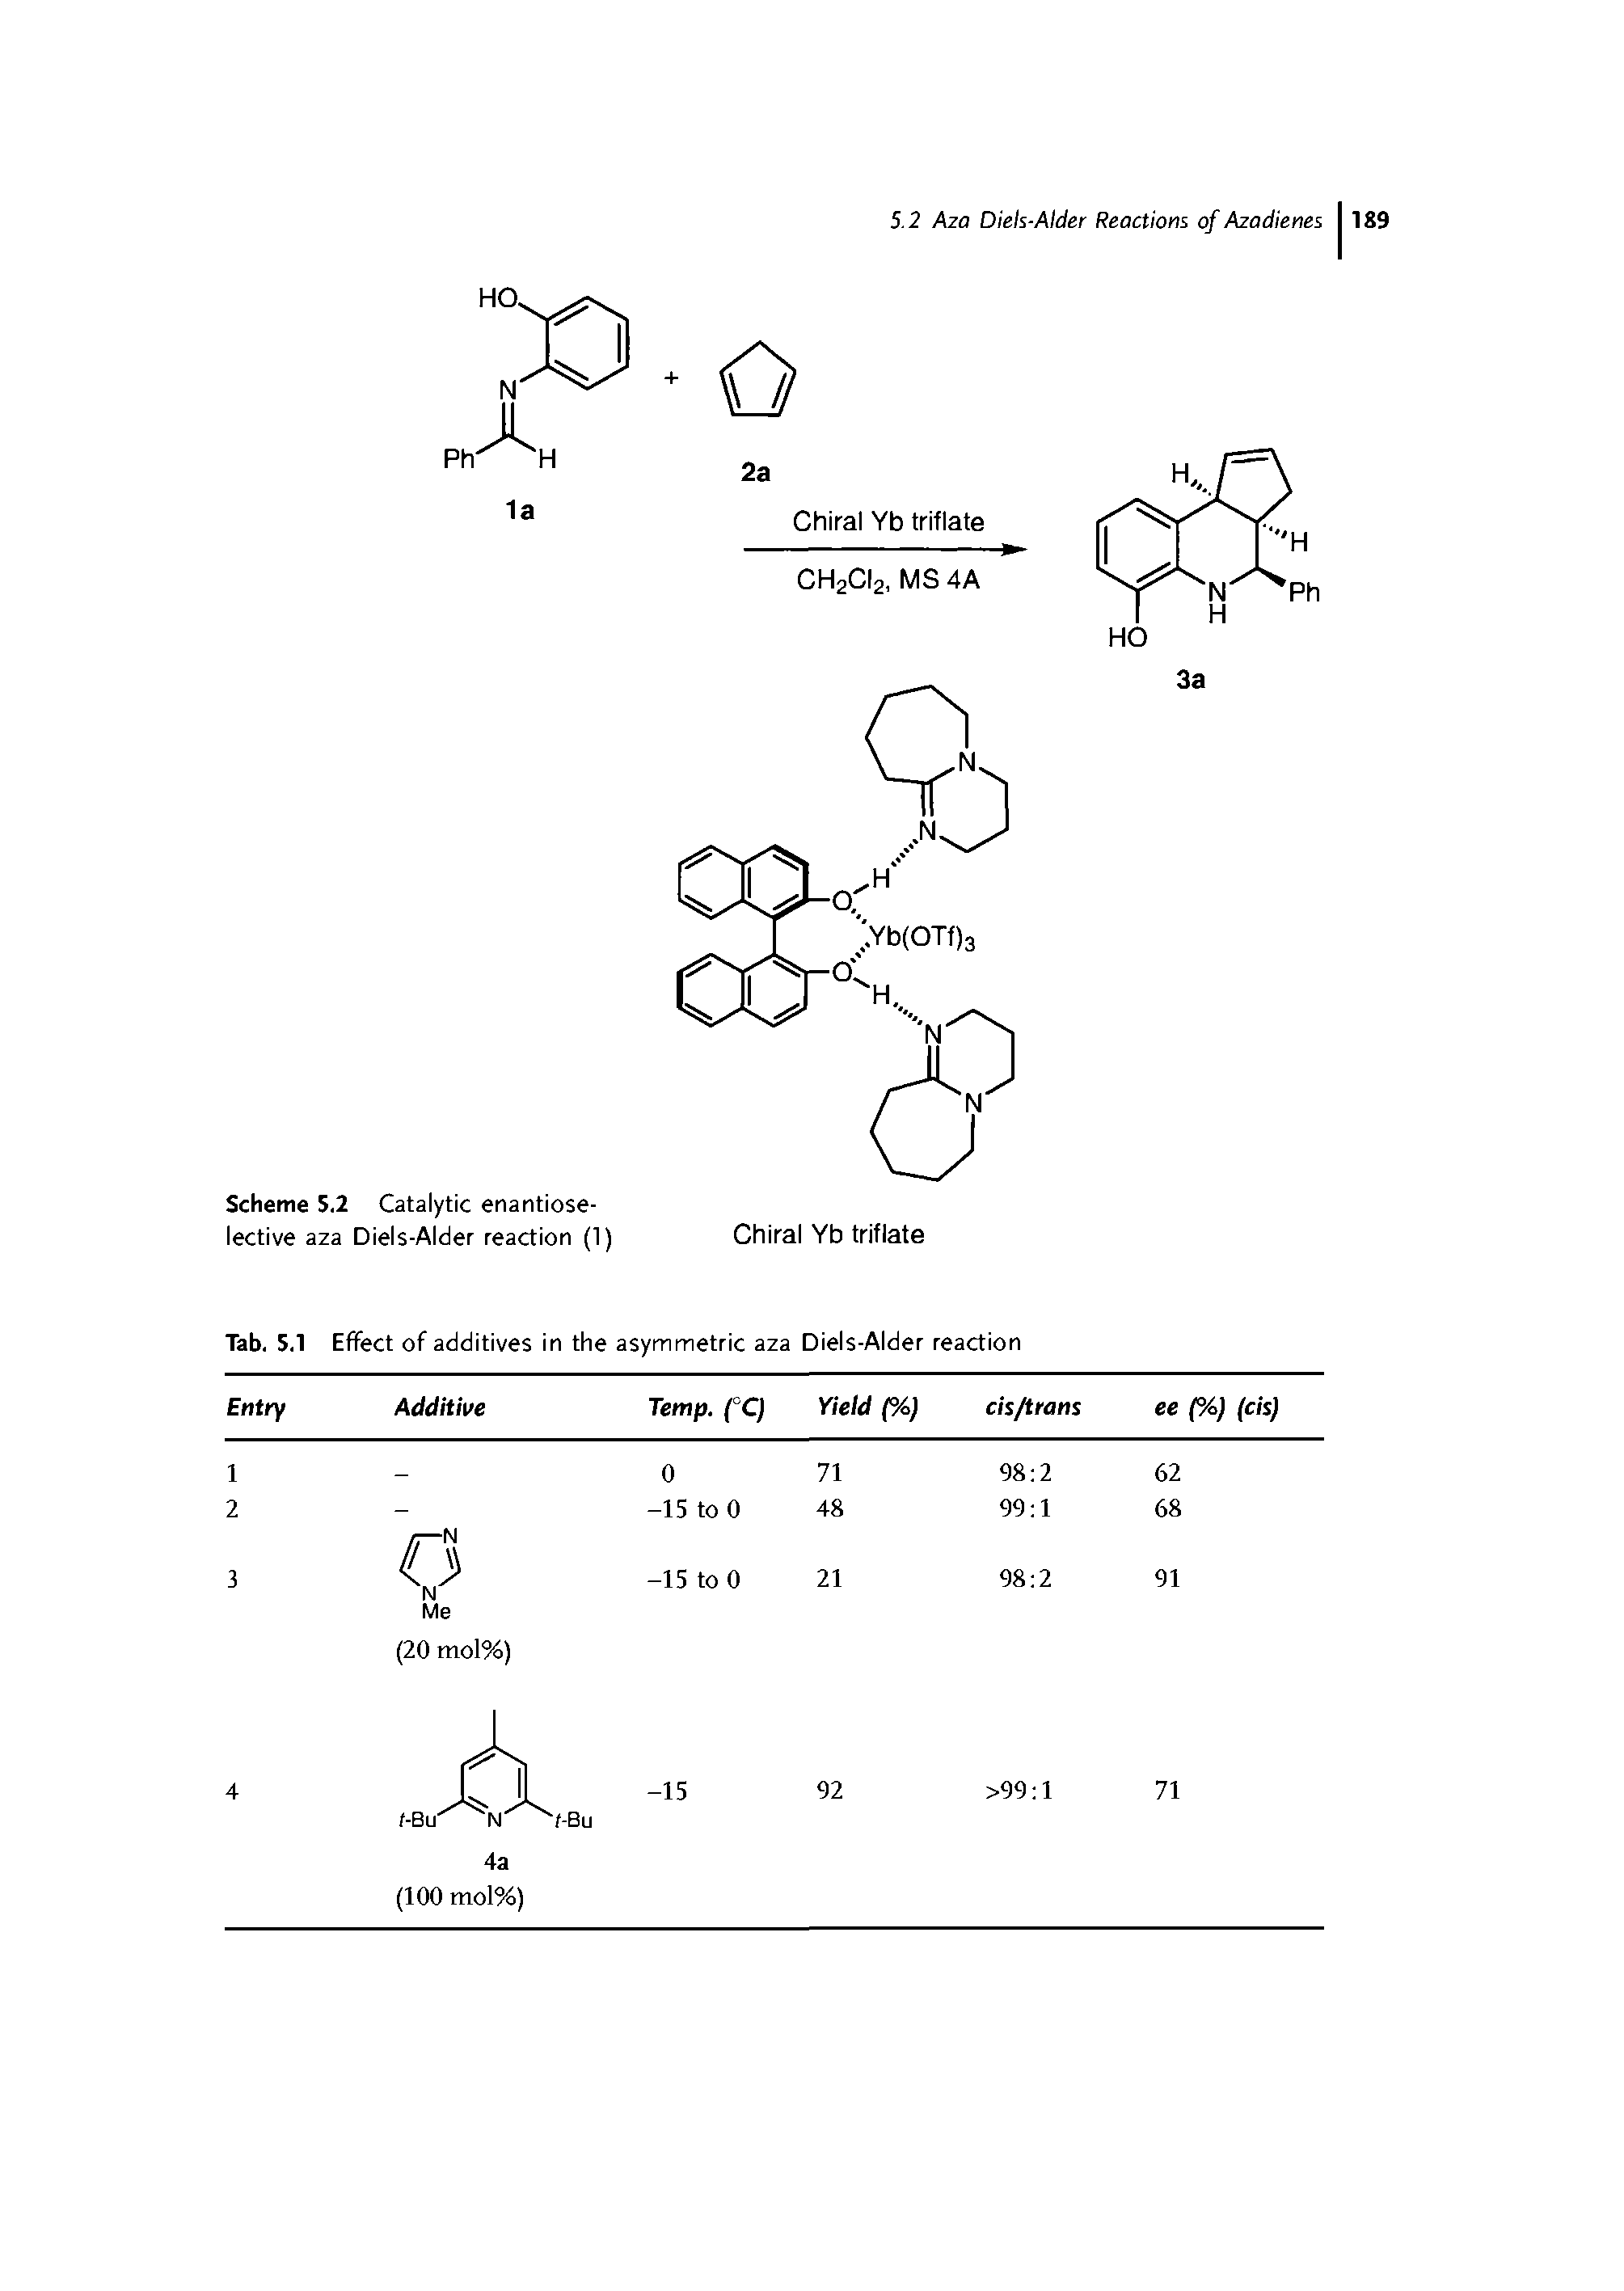 Tab. 5.1 Effect of additives in the asymmetric aza Diels-Alder reaction...